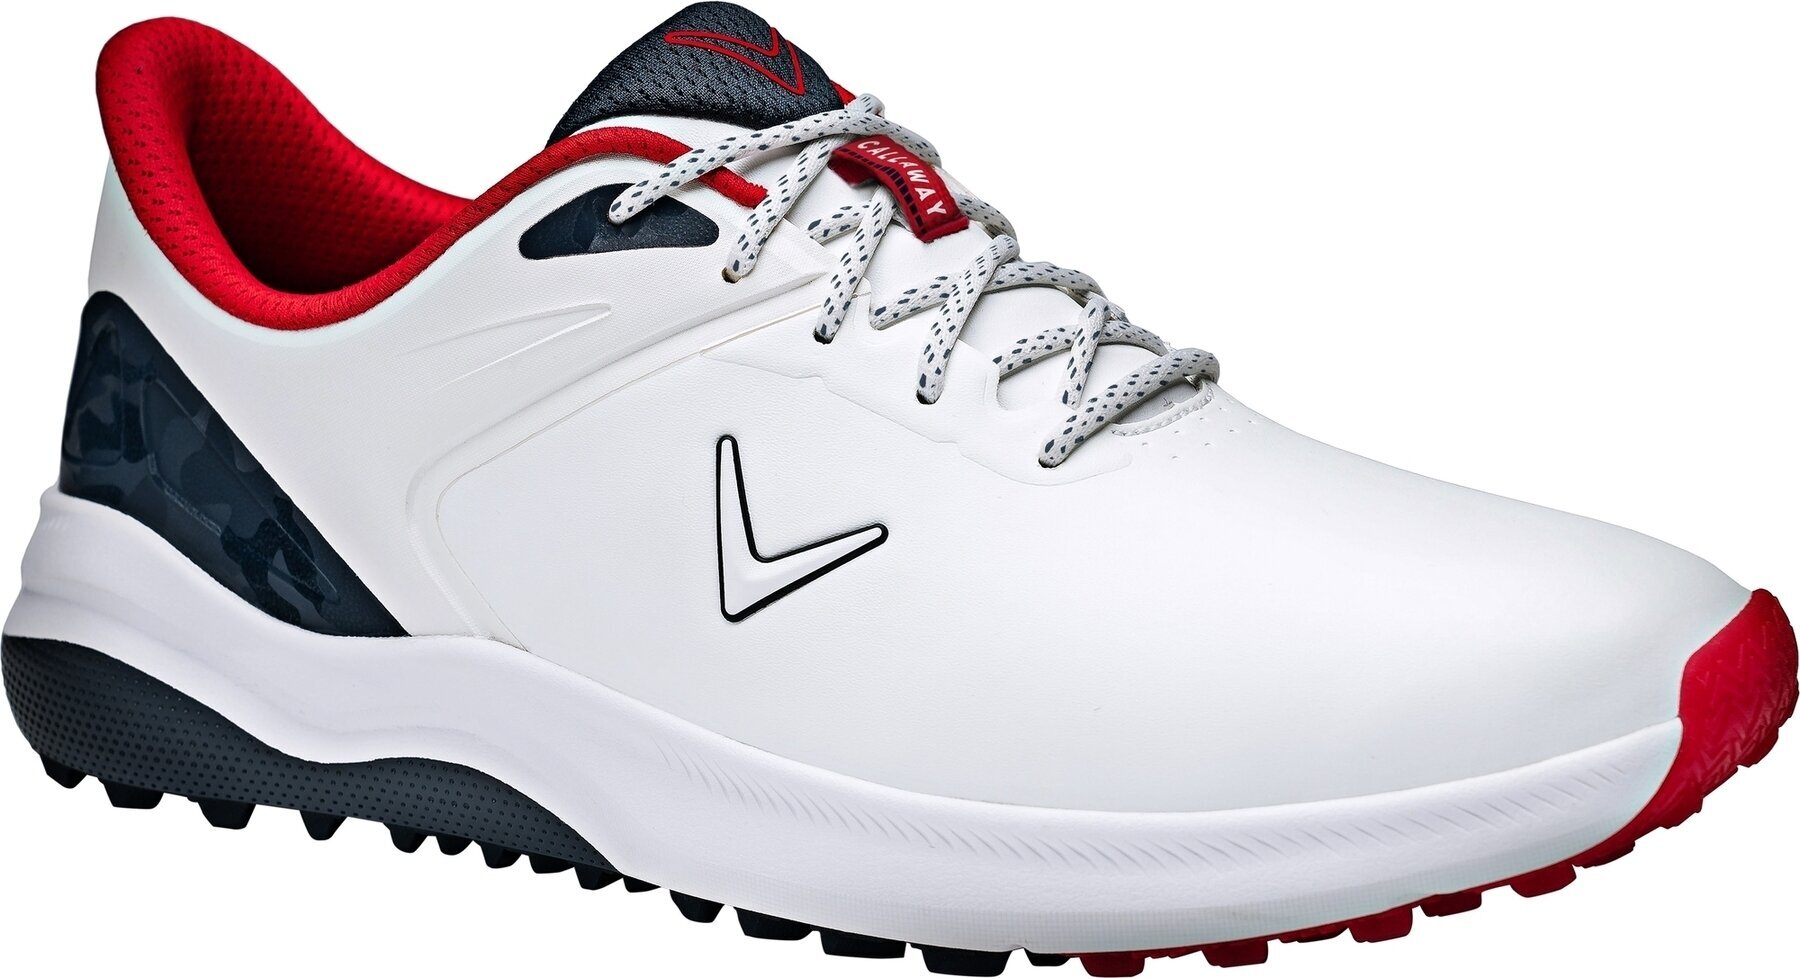 Chaussures de golf pour hommes Callaway Lazer Mens Golf Shoes White/Navy/Red 47